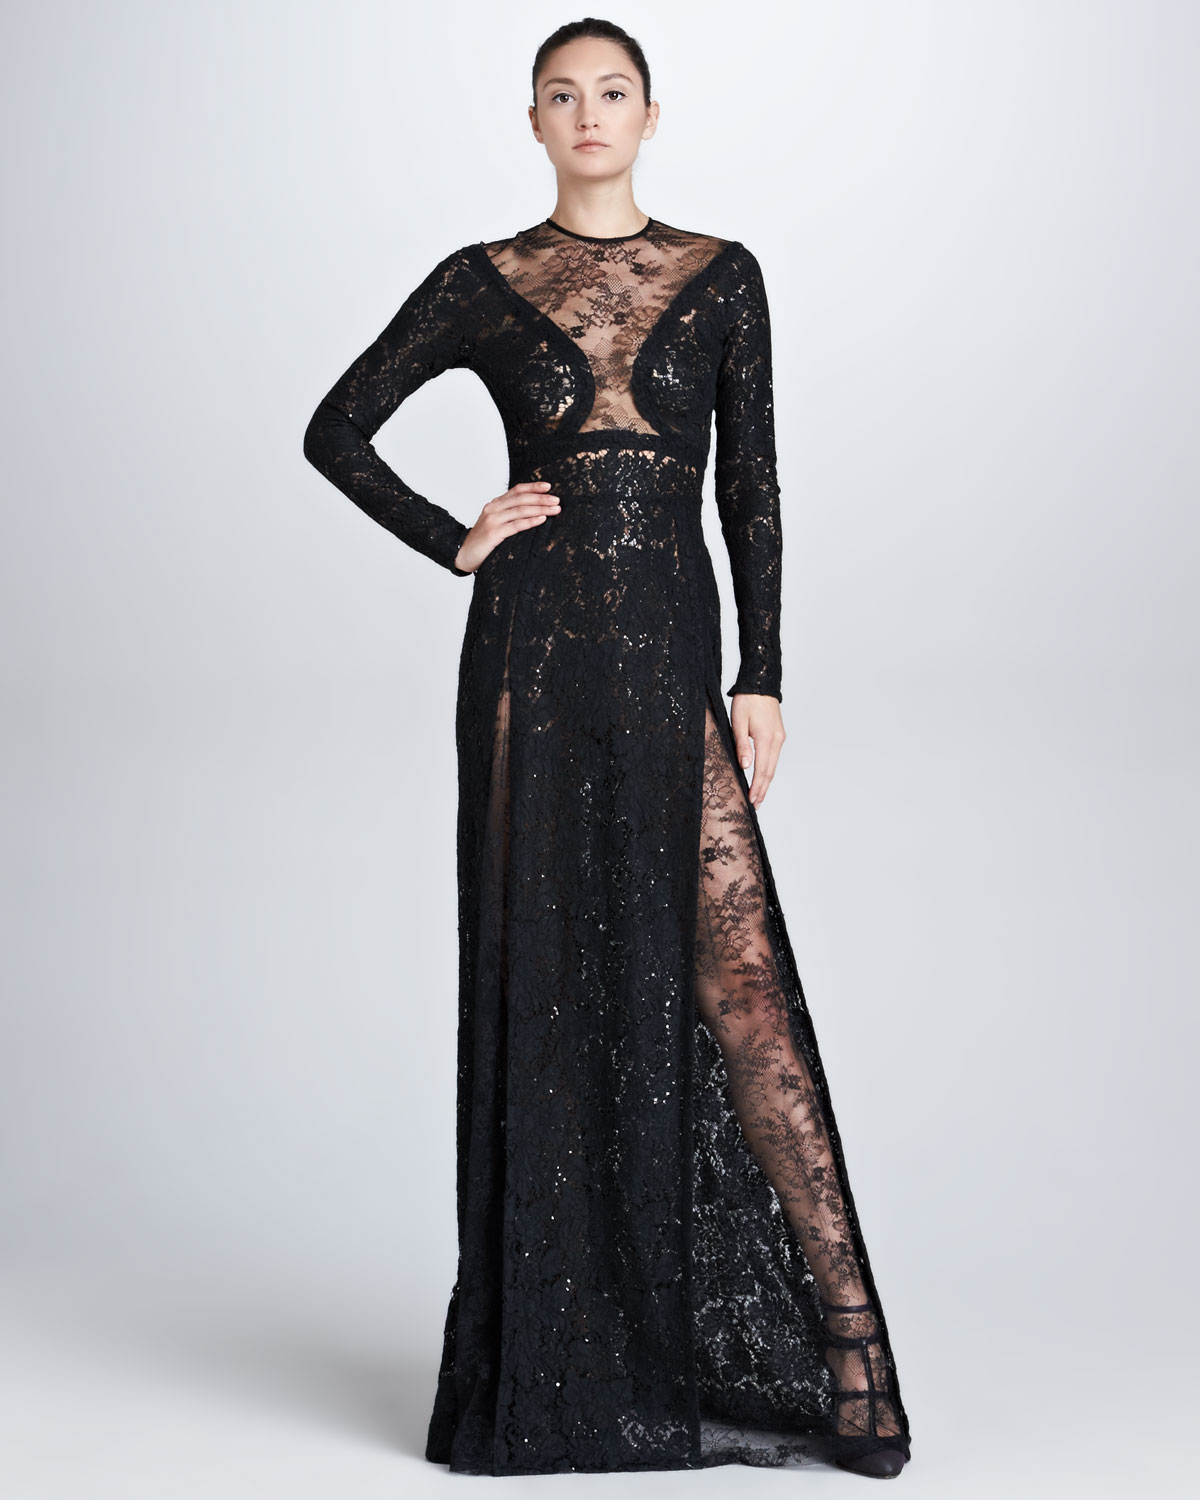 Lyst - Elie Saab Long Sleeve Lace Gown in Black